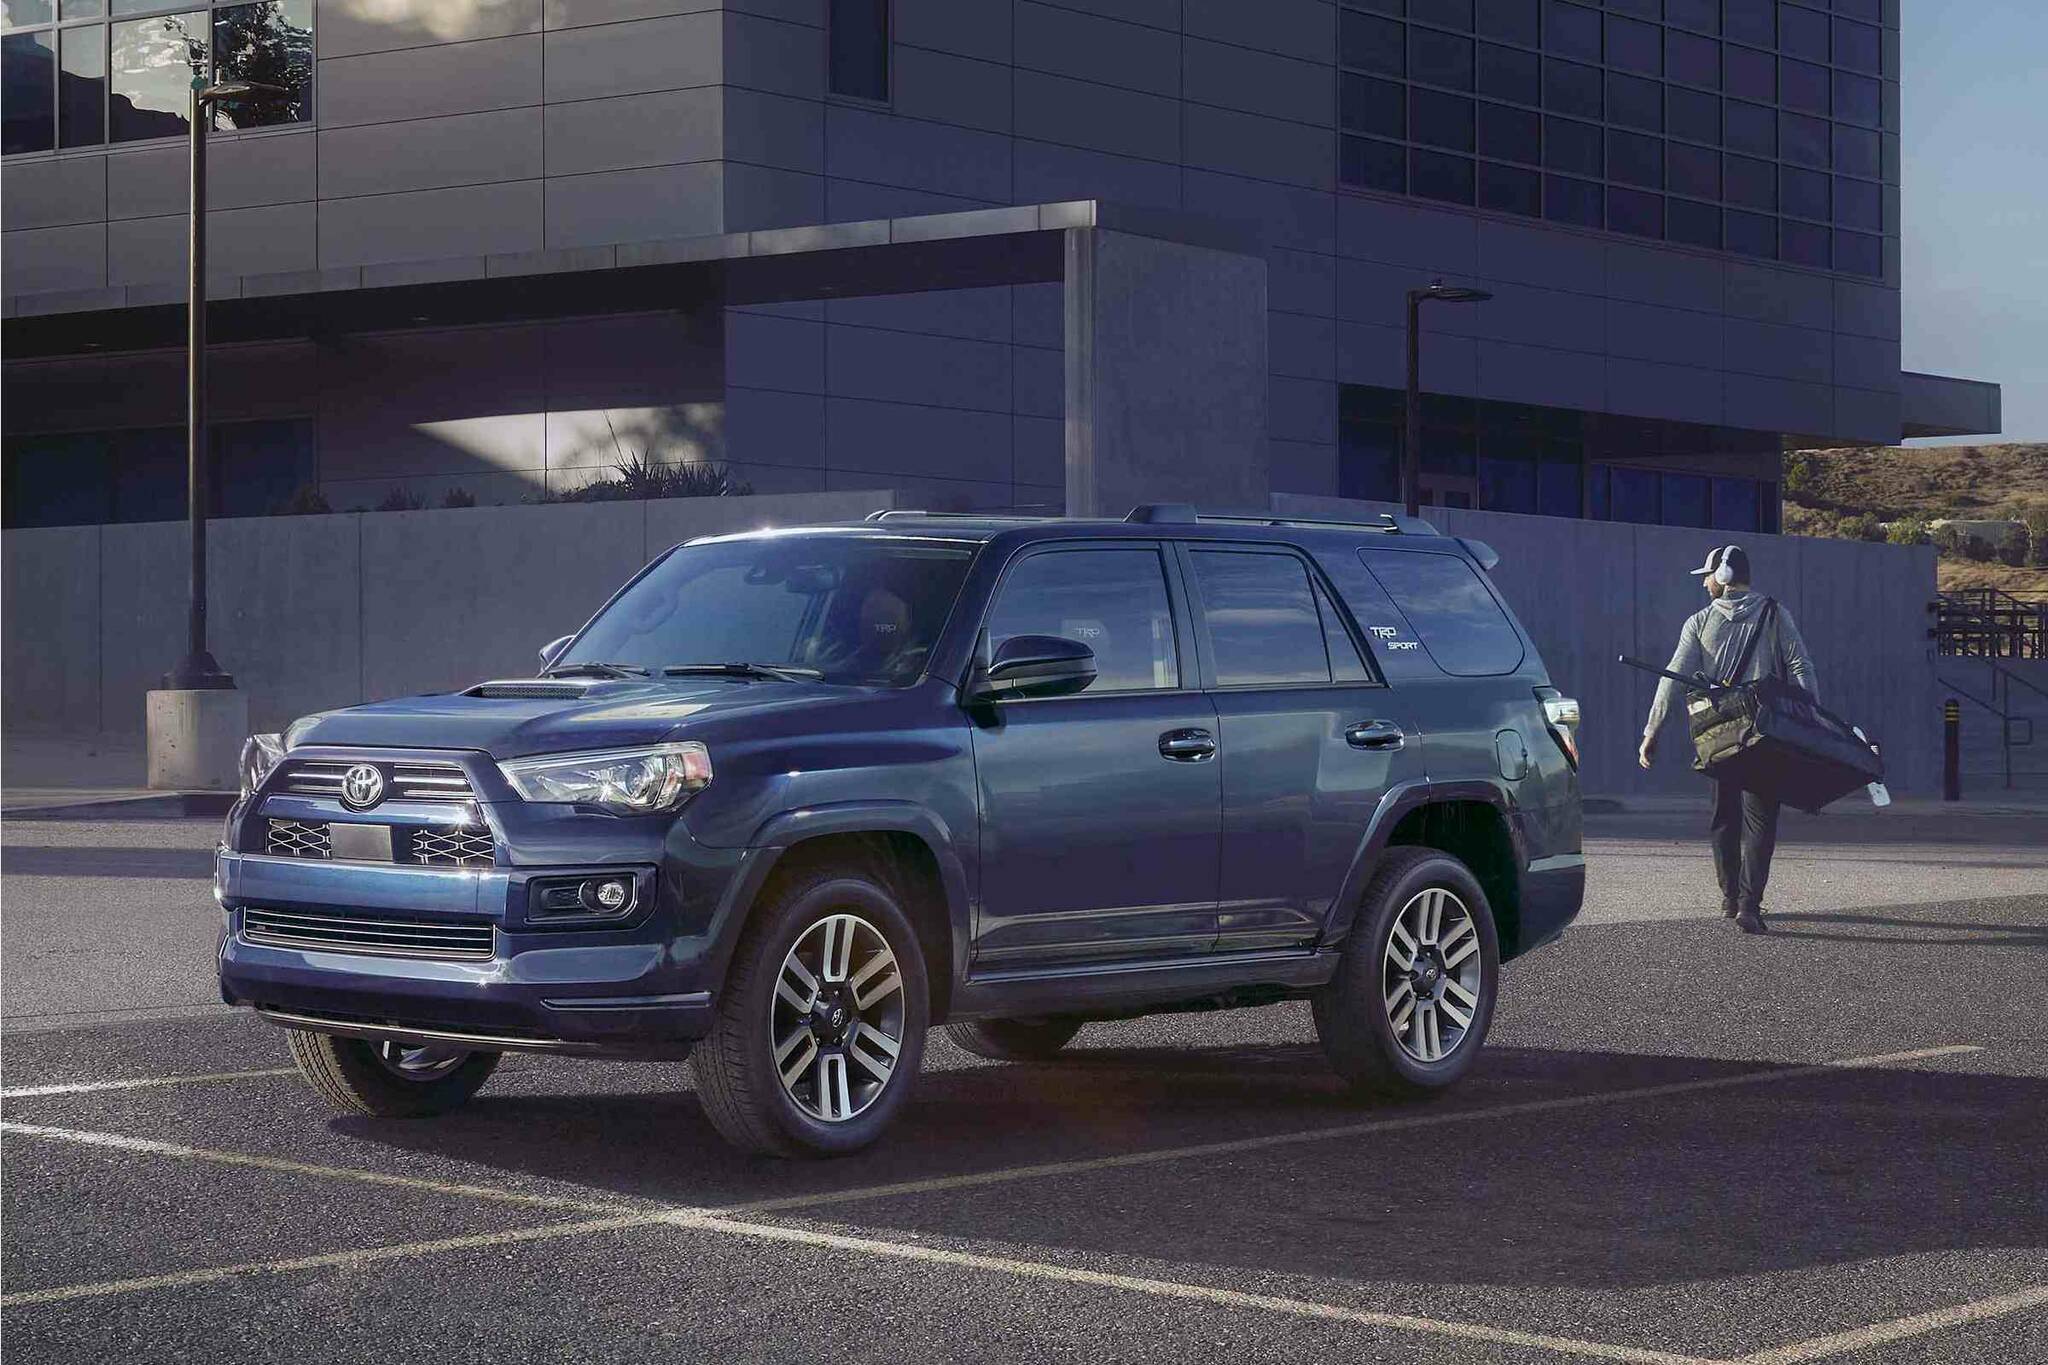 On smooth pavement, the 4Runner drives well, but over rough surfaces, the ride can get quite harsh. PHOTO: TOYOTA